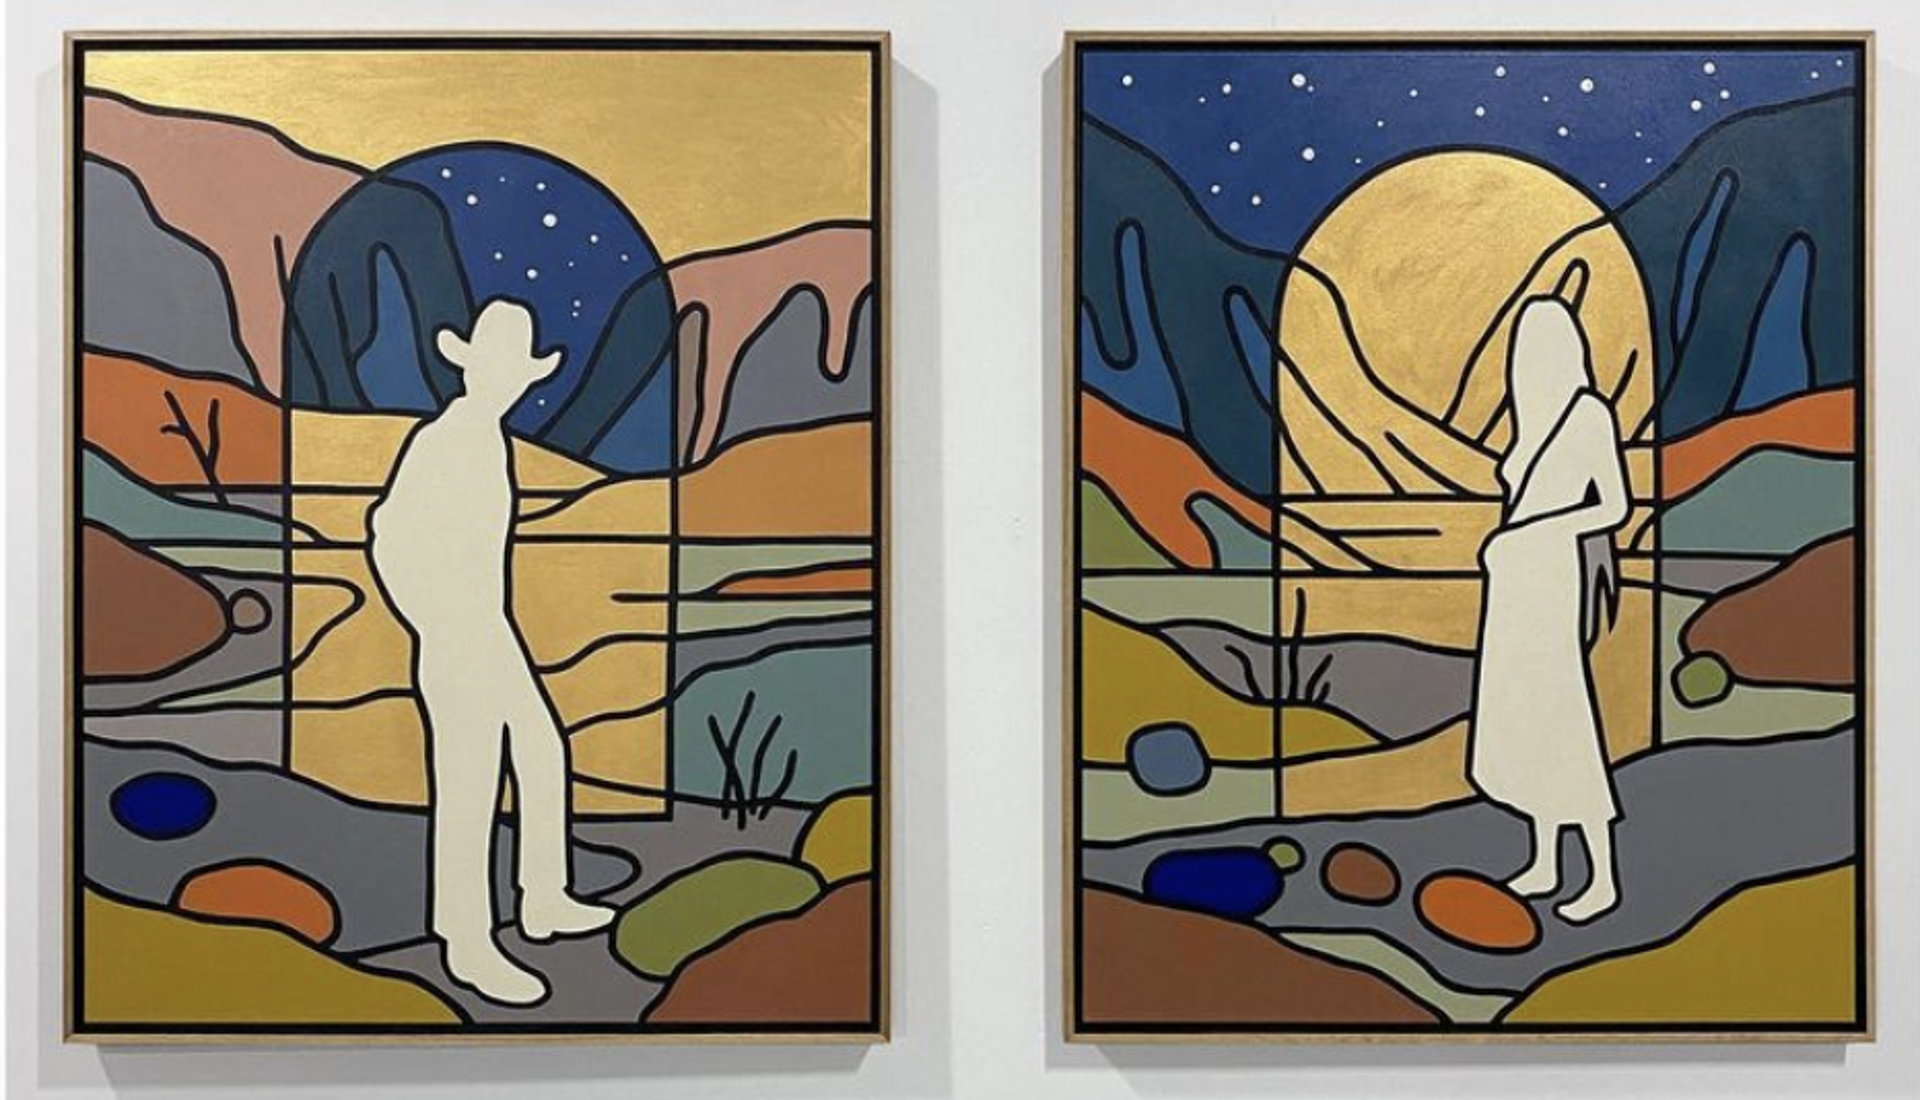 Diptych Commission for Jen and Will by Tom Jean Webb